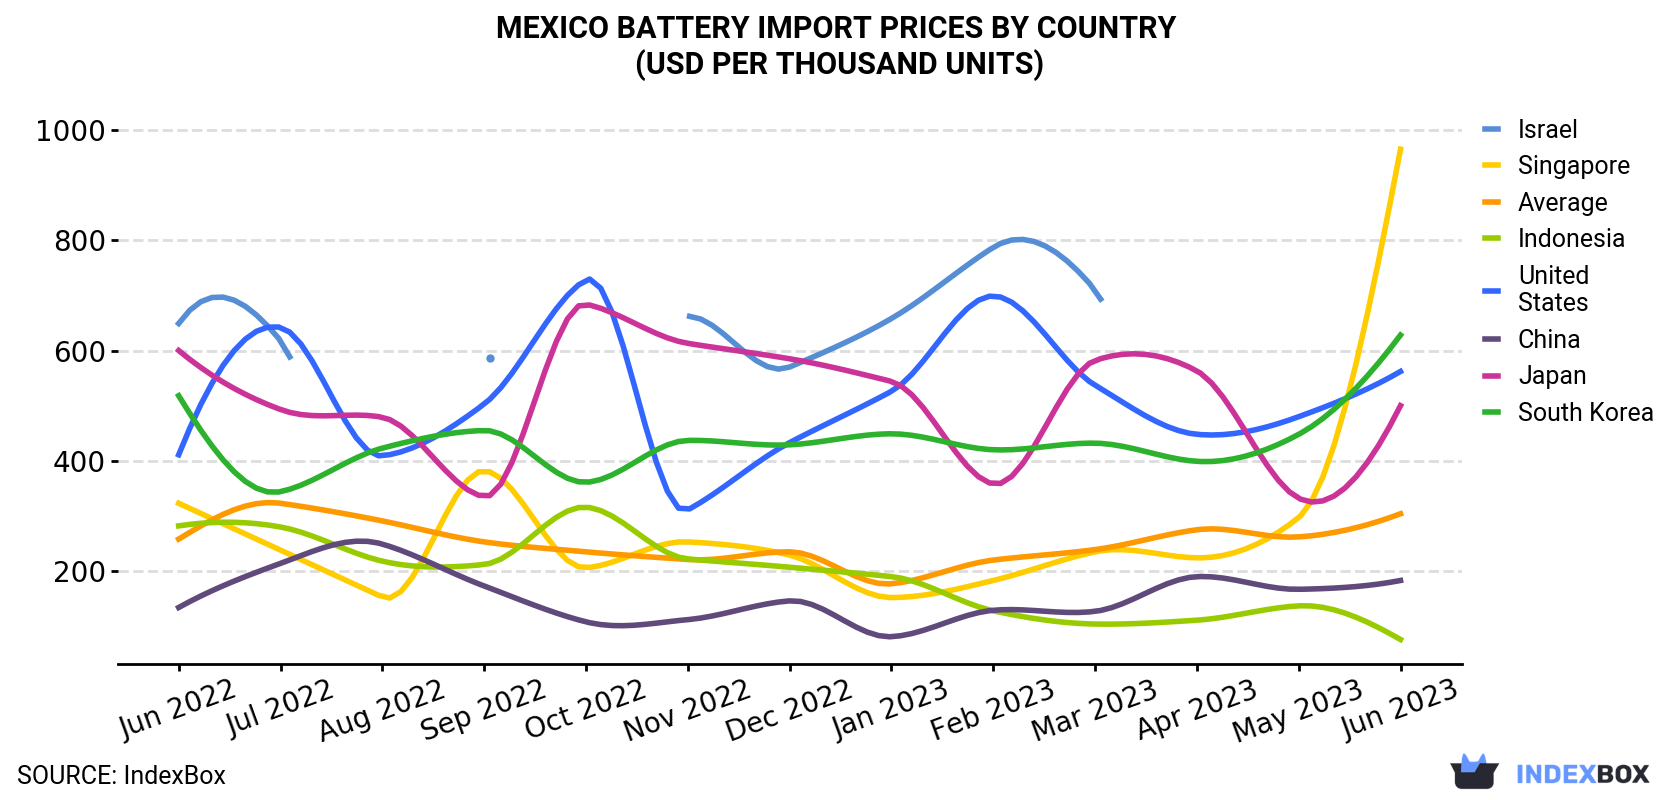 Mexico Battery Import Prices By Country (USD Per Thousand Units)